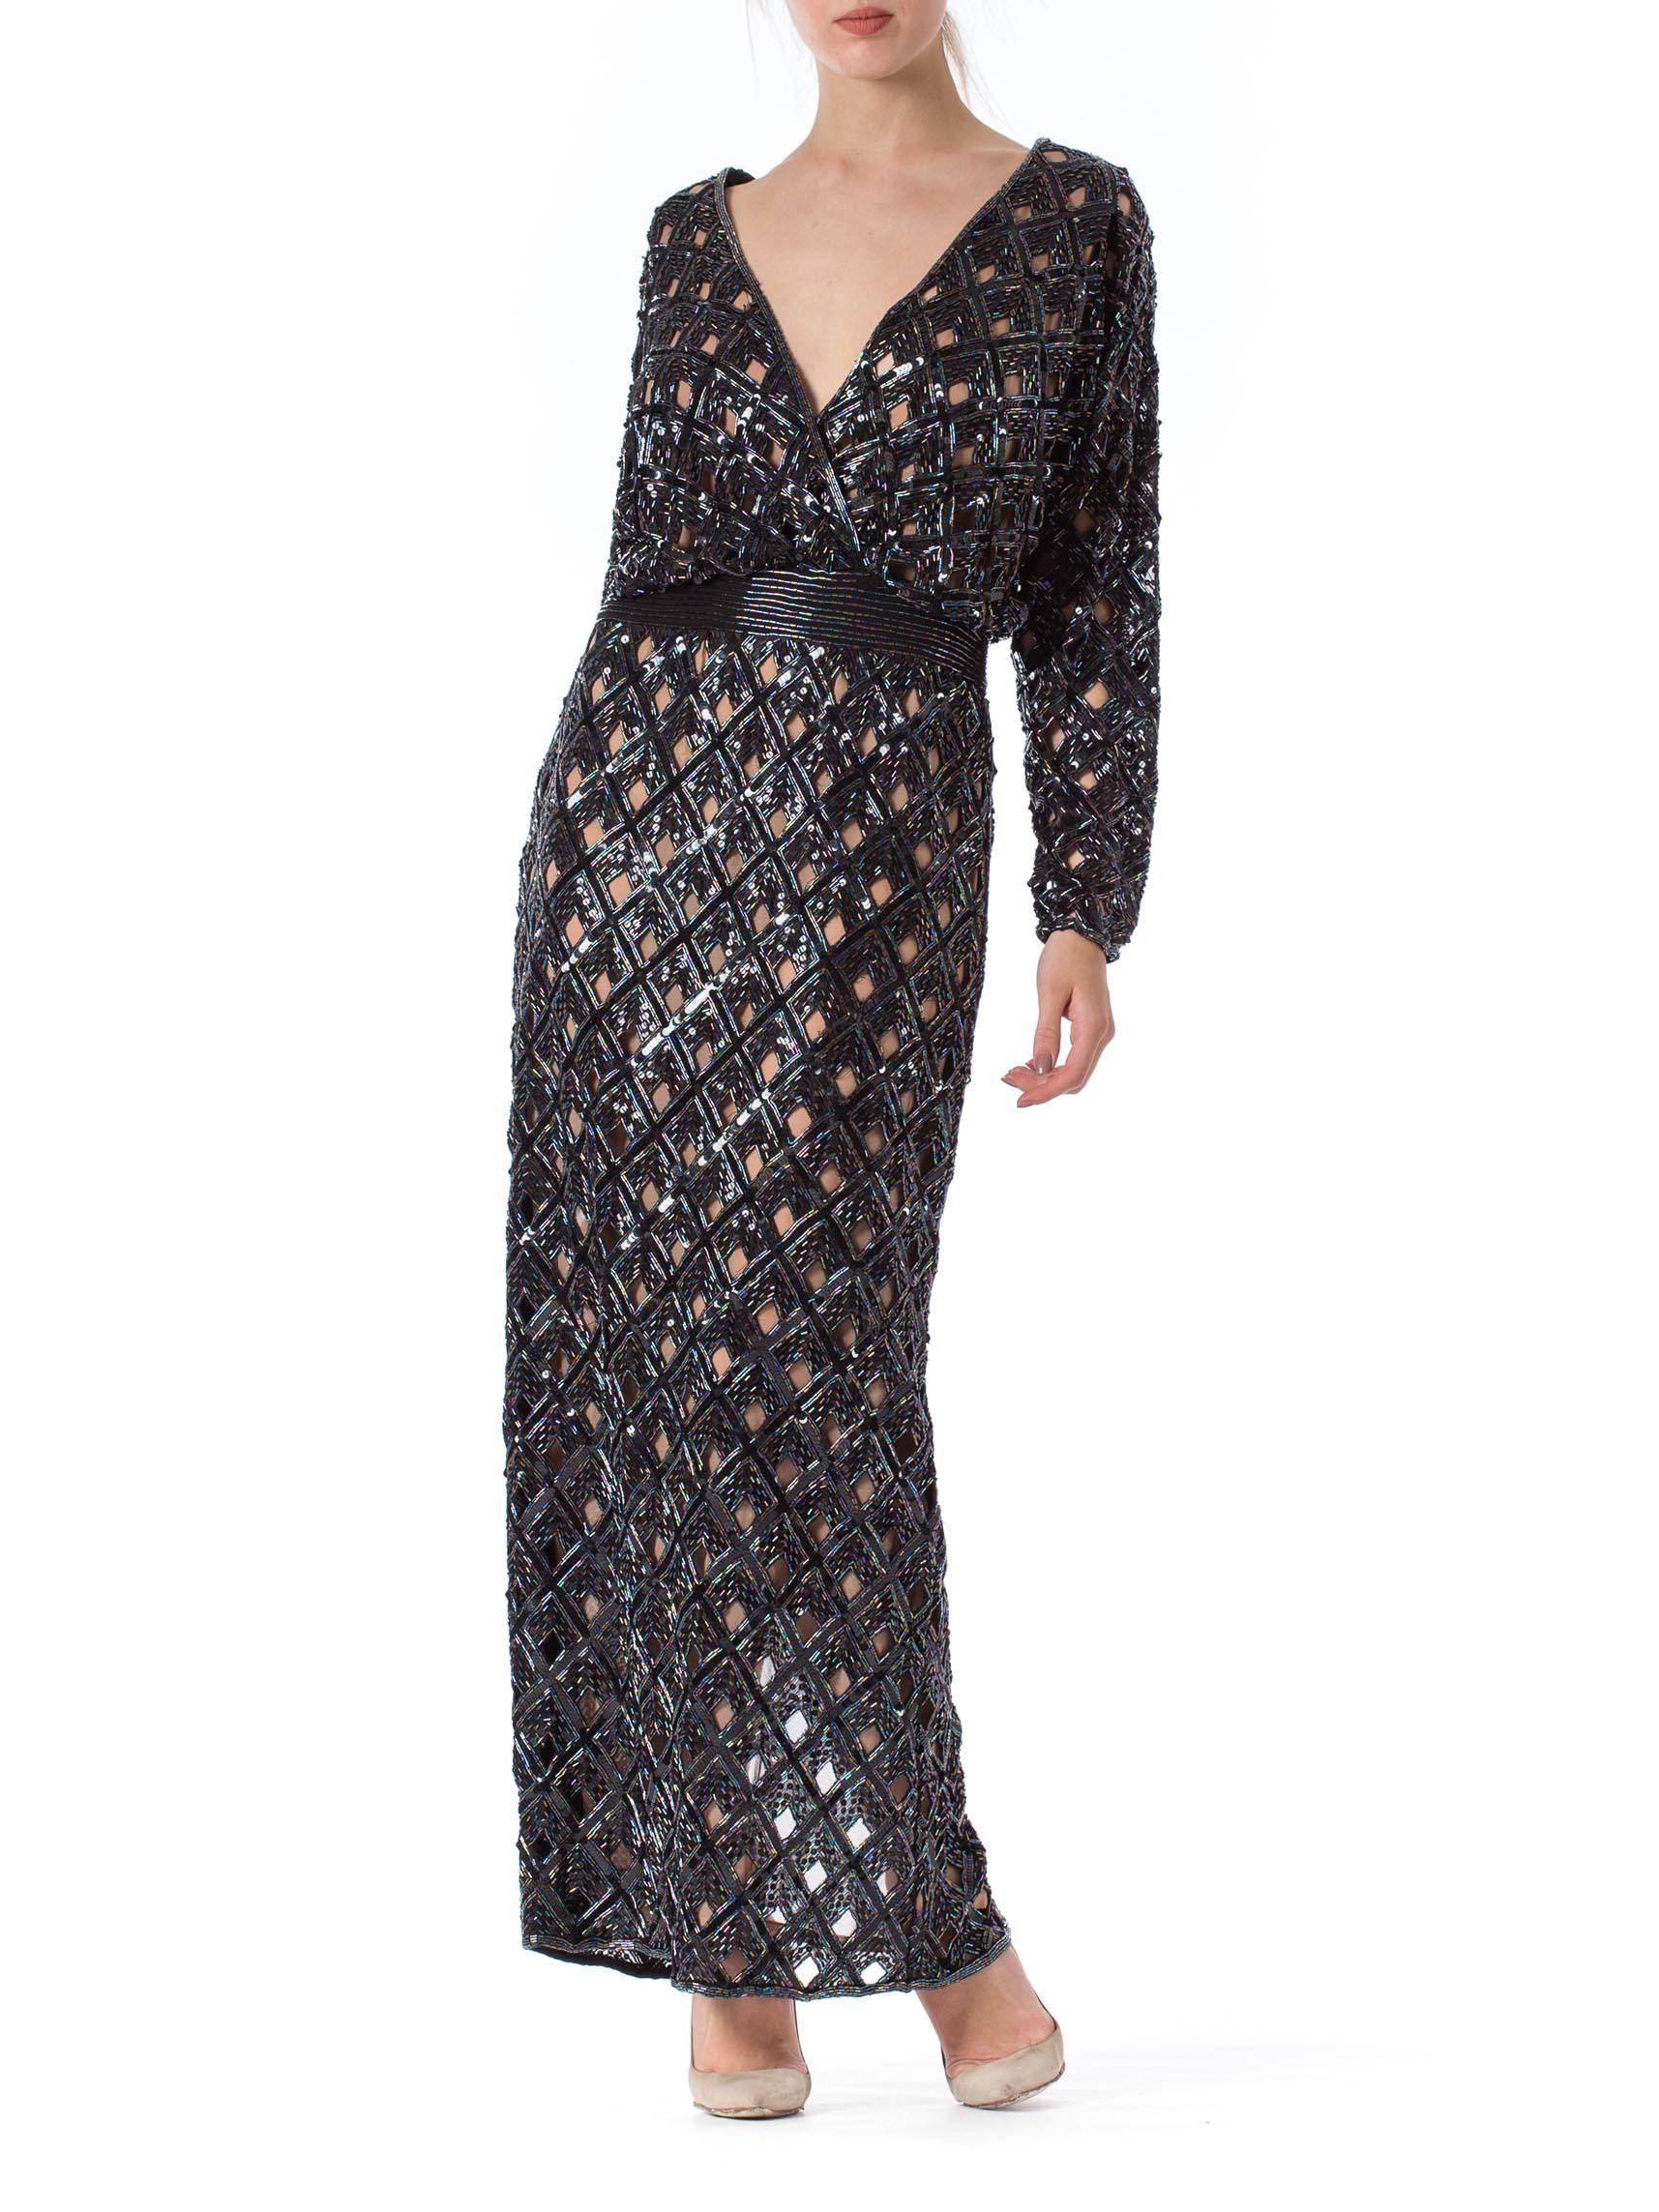 Women's 1970S BOB MACKIE Black Beaded Silk Geometric Cut Out Low & Backless Gown For Sale